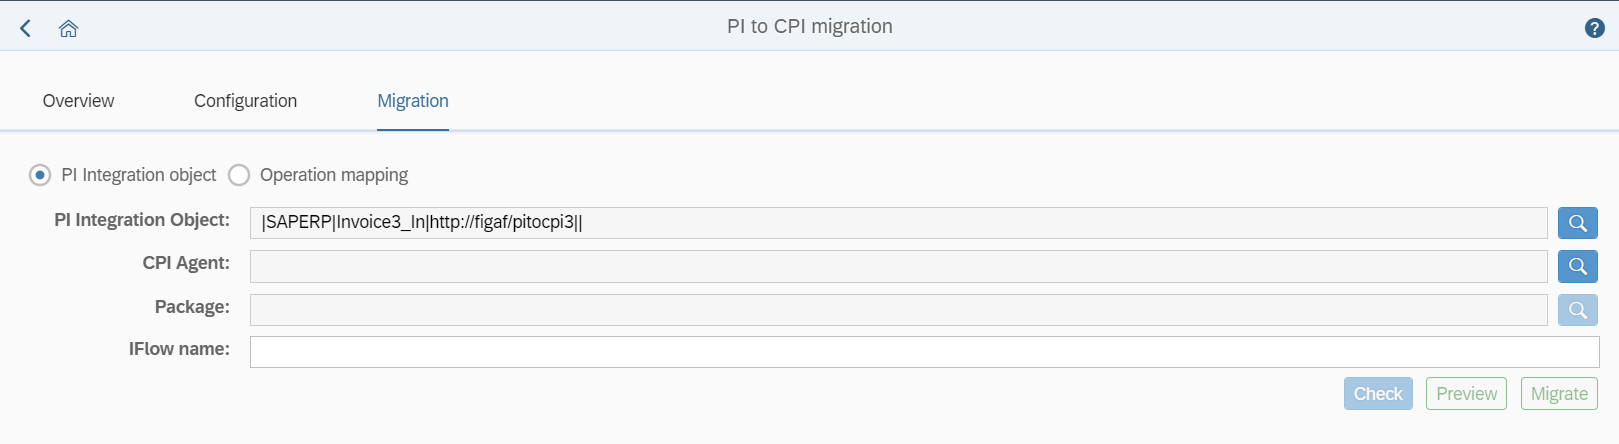 migration with predefined data